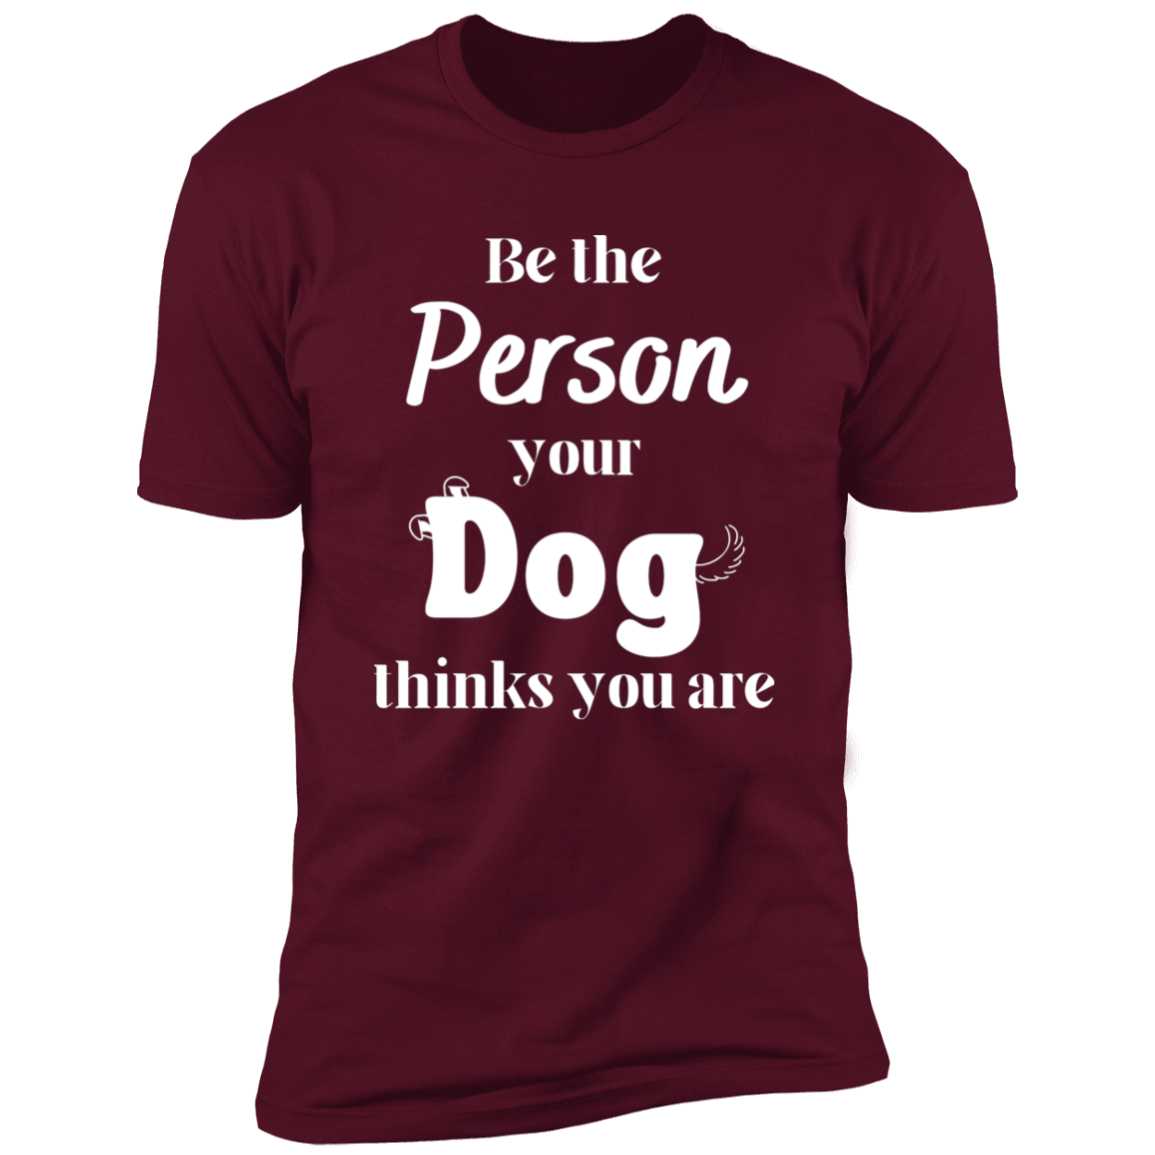 Be the Person Your Dog Thinks You Are T-shirt, Dog Shirt for humans, in maroon